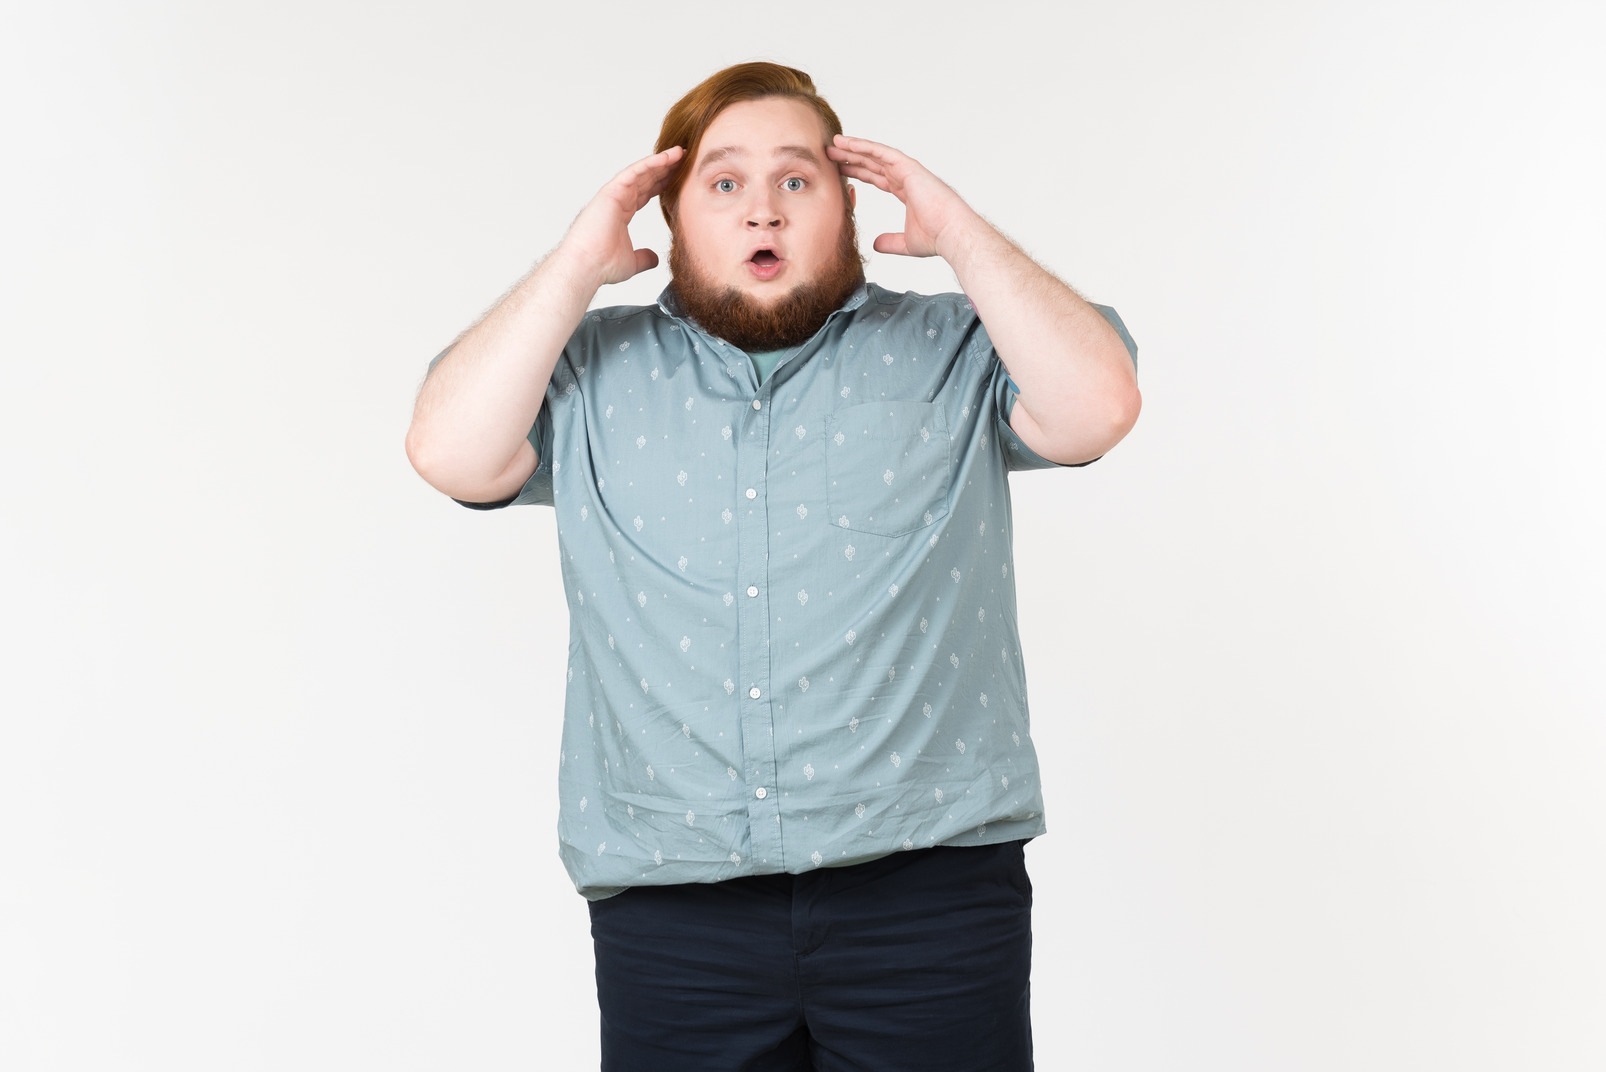 Blown away young overweight man touching his head